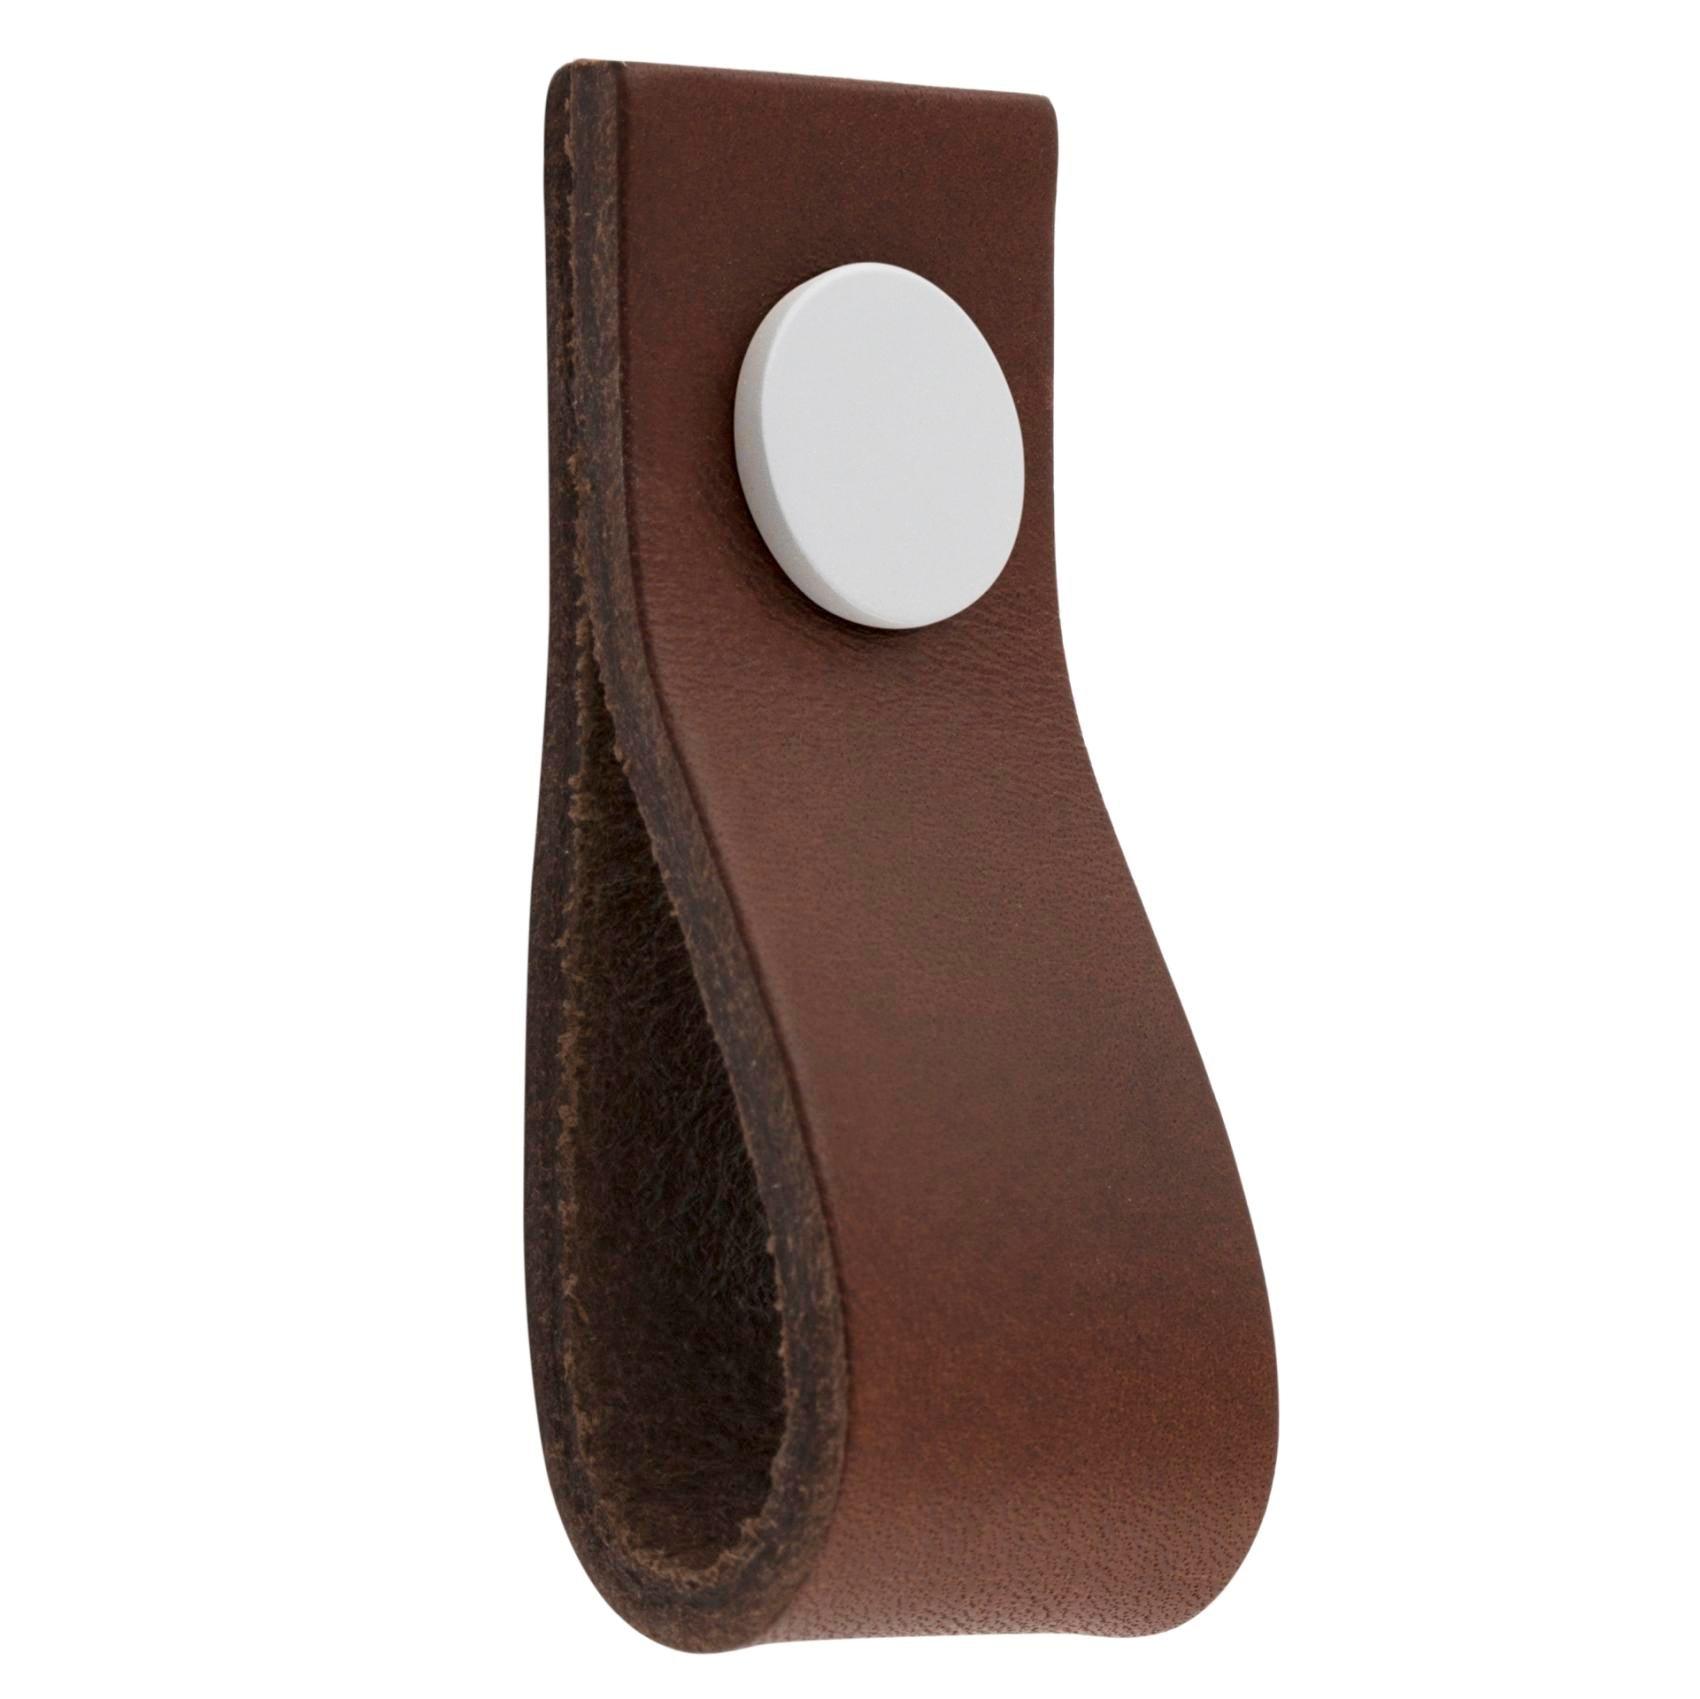 MANER TIP BUTON ARI WHITE/BROWN LEATHER inaltime 25 mm, grosime 2,5 mm, lungime 65 mm - PARIS14A.RO